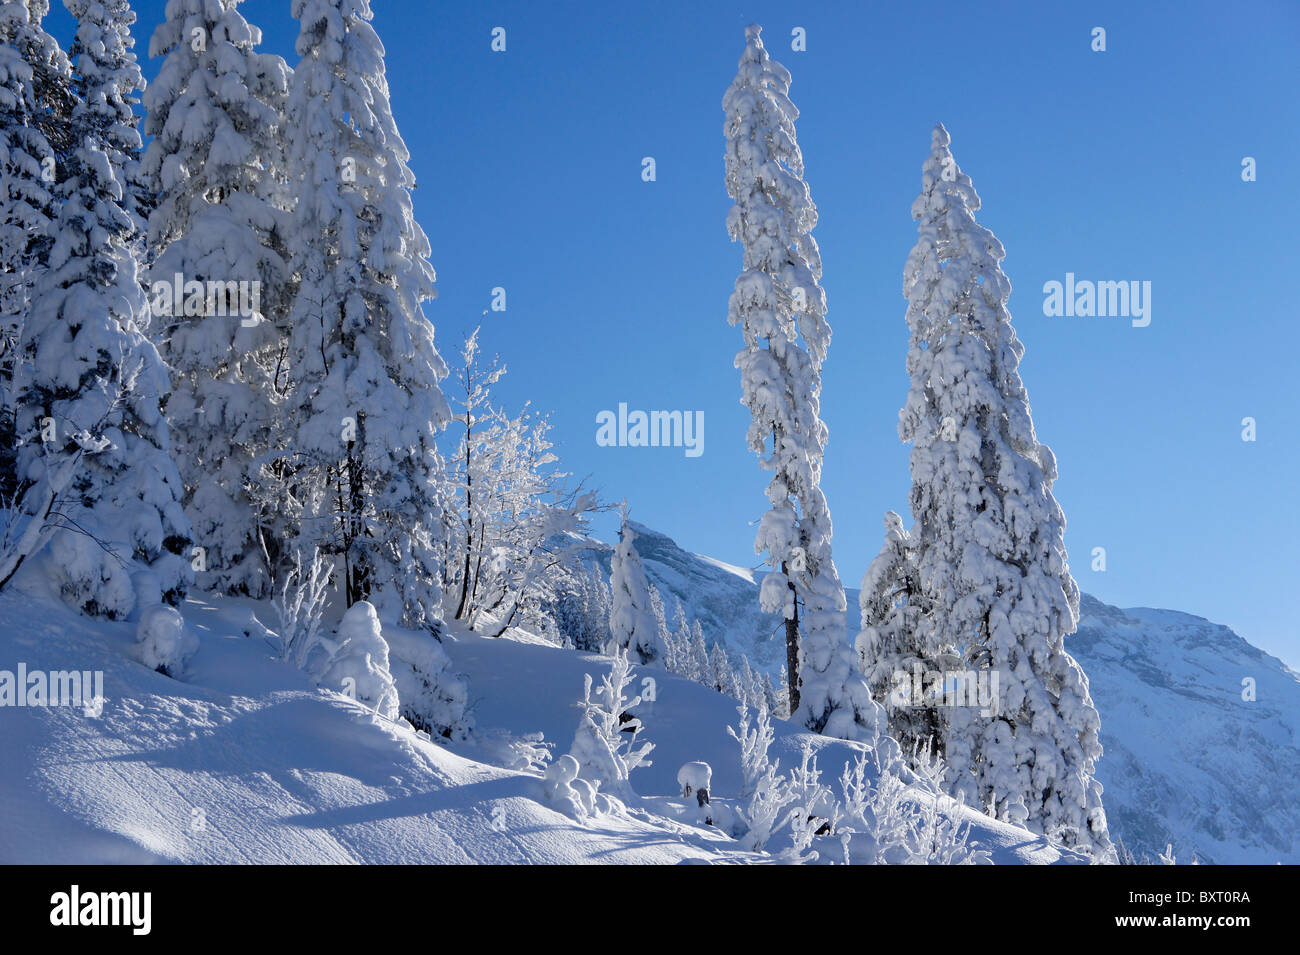 Spruce trees covered in fresh snow, Adelboden, Switzerland Stock Photo